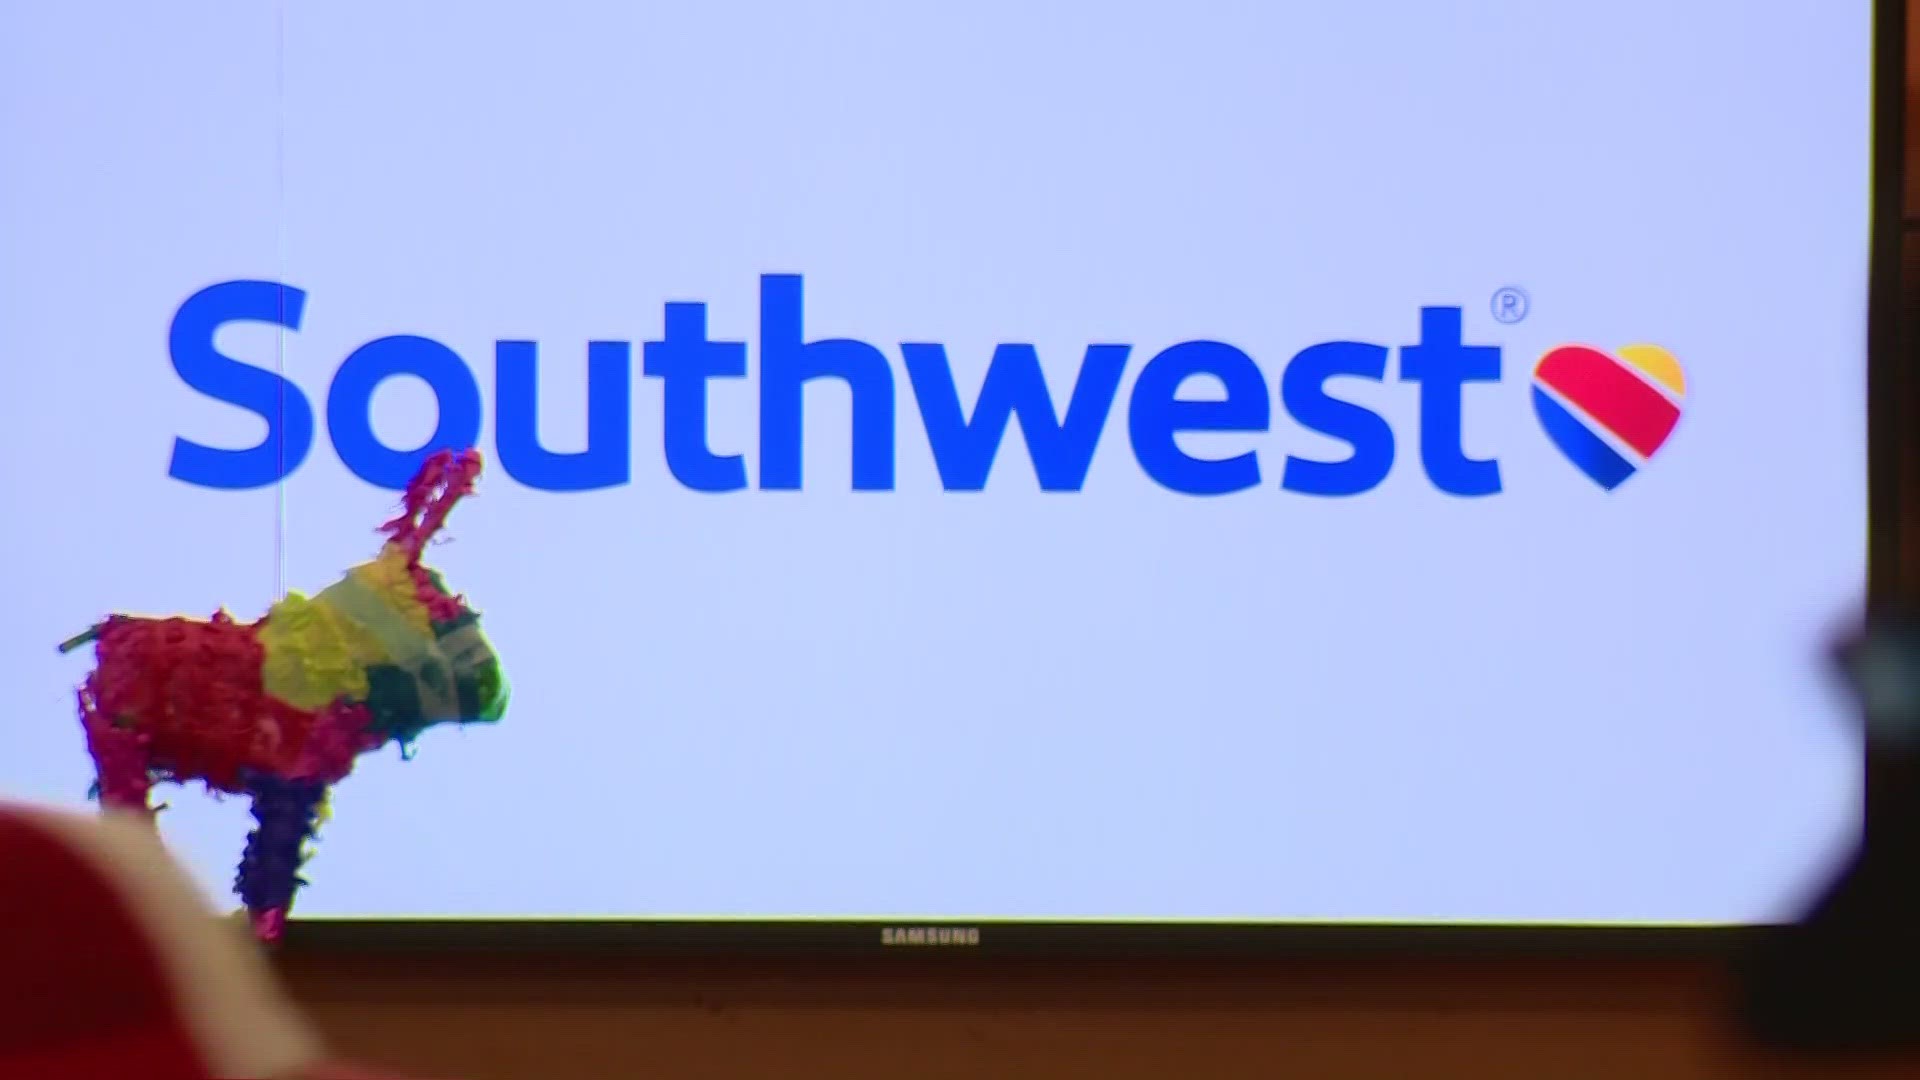 More than 1,700 Southwest flights have already been delayed Tuesday, according to flight tracking website FlightAware.